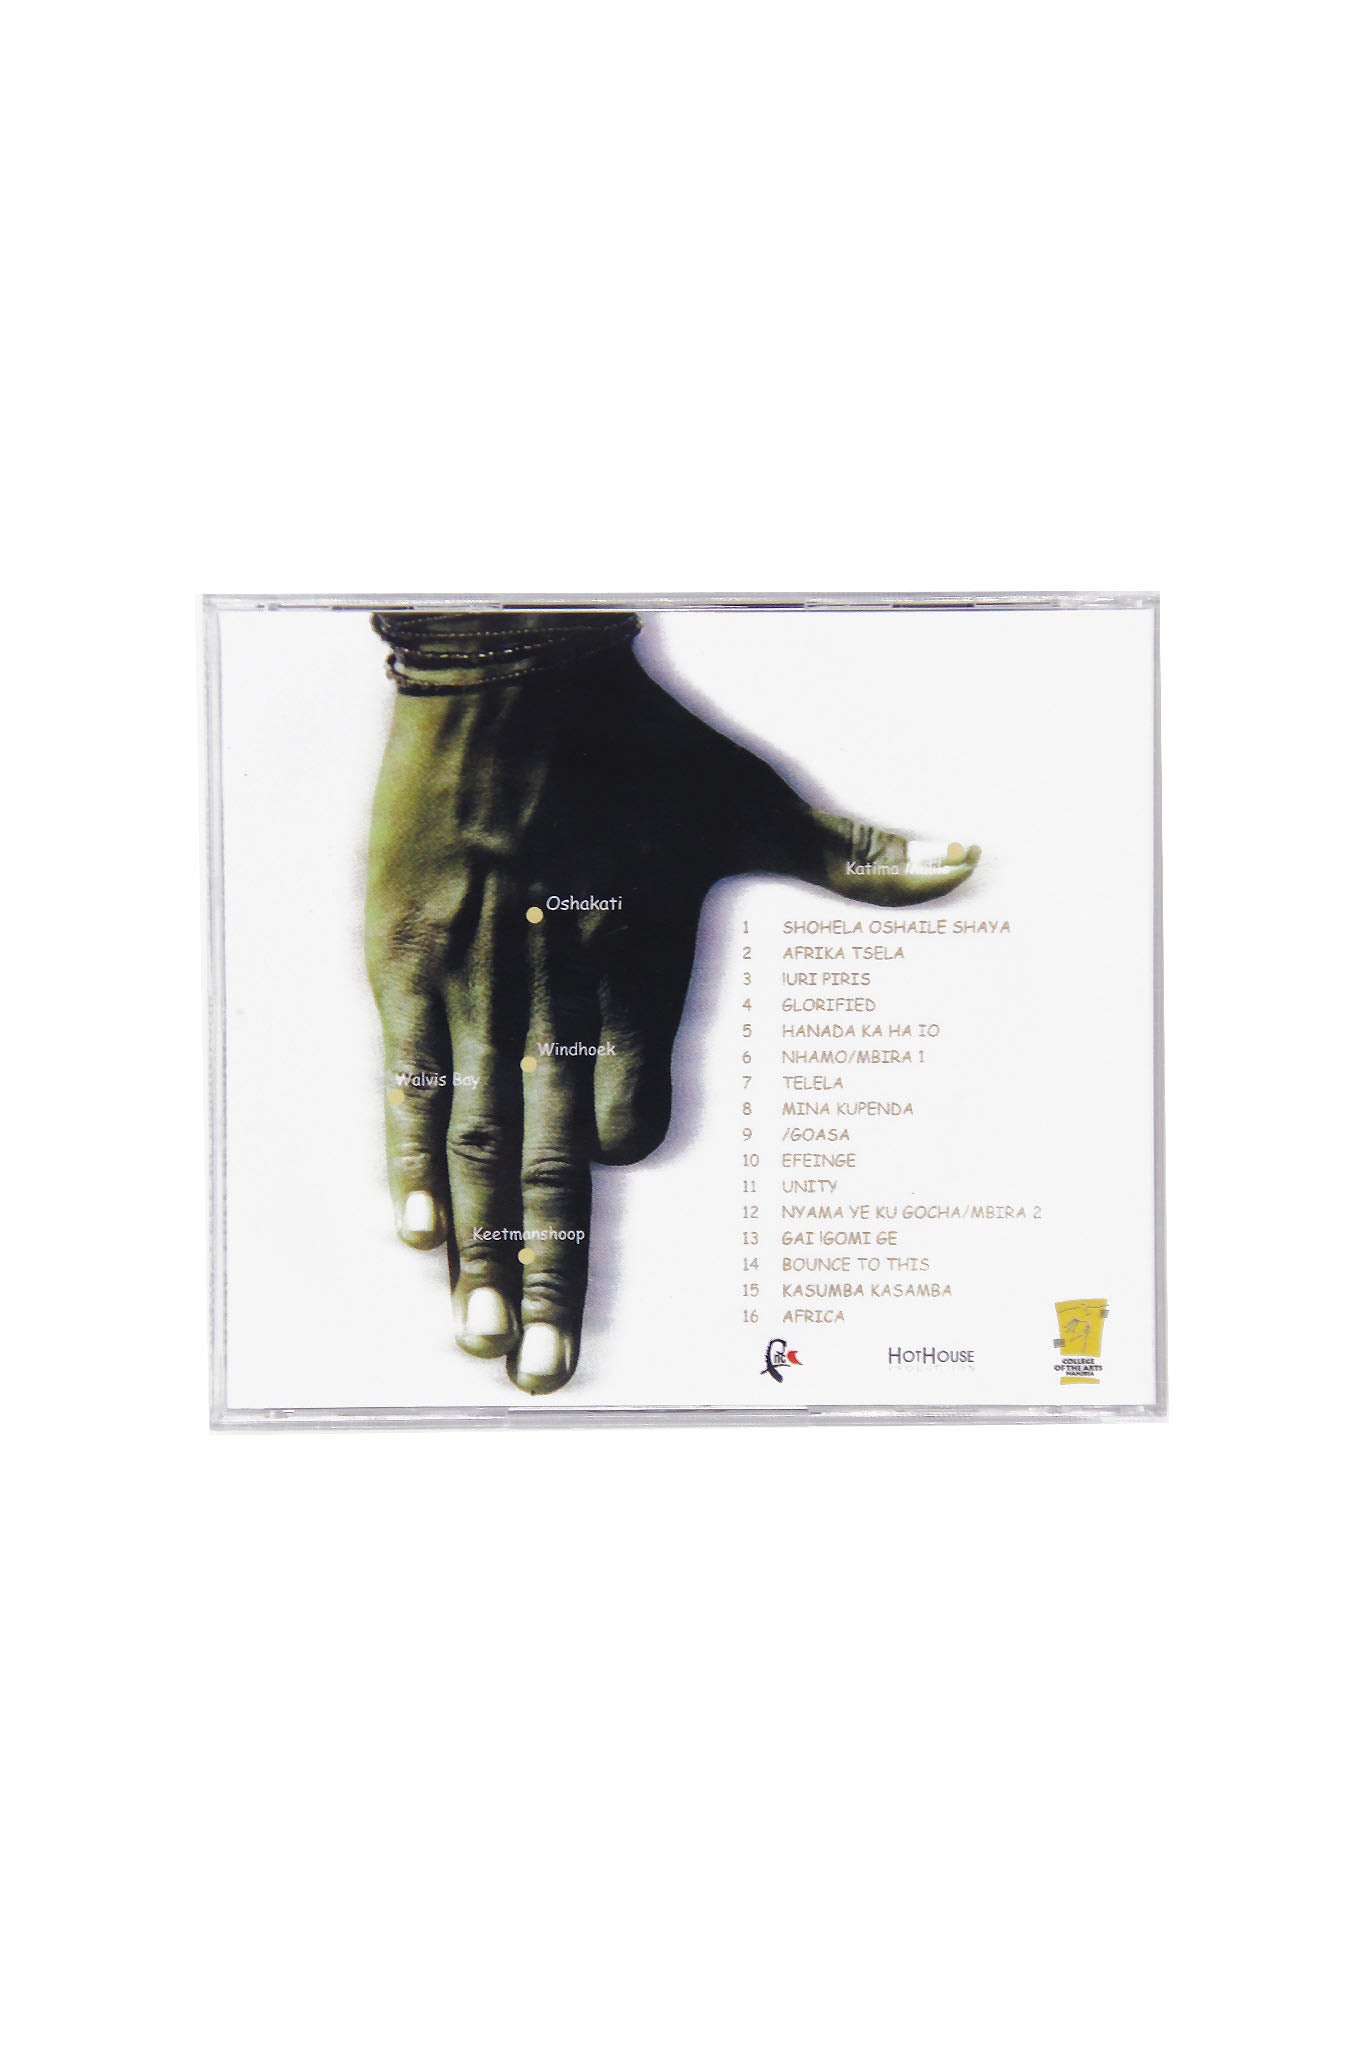 A Hand-Full of Namibia CD